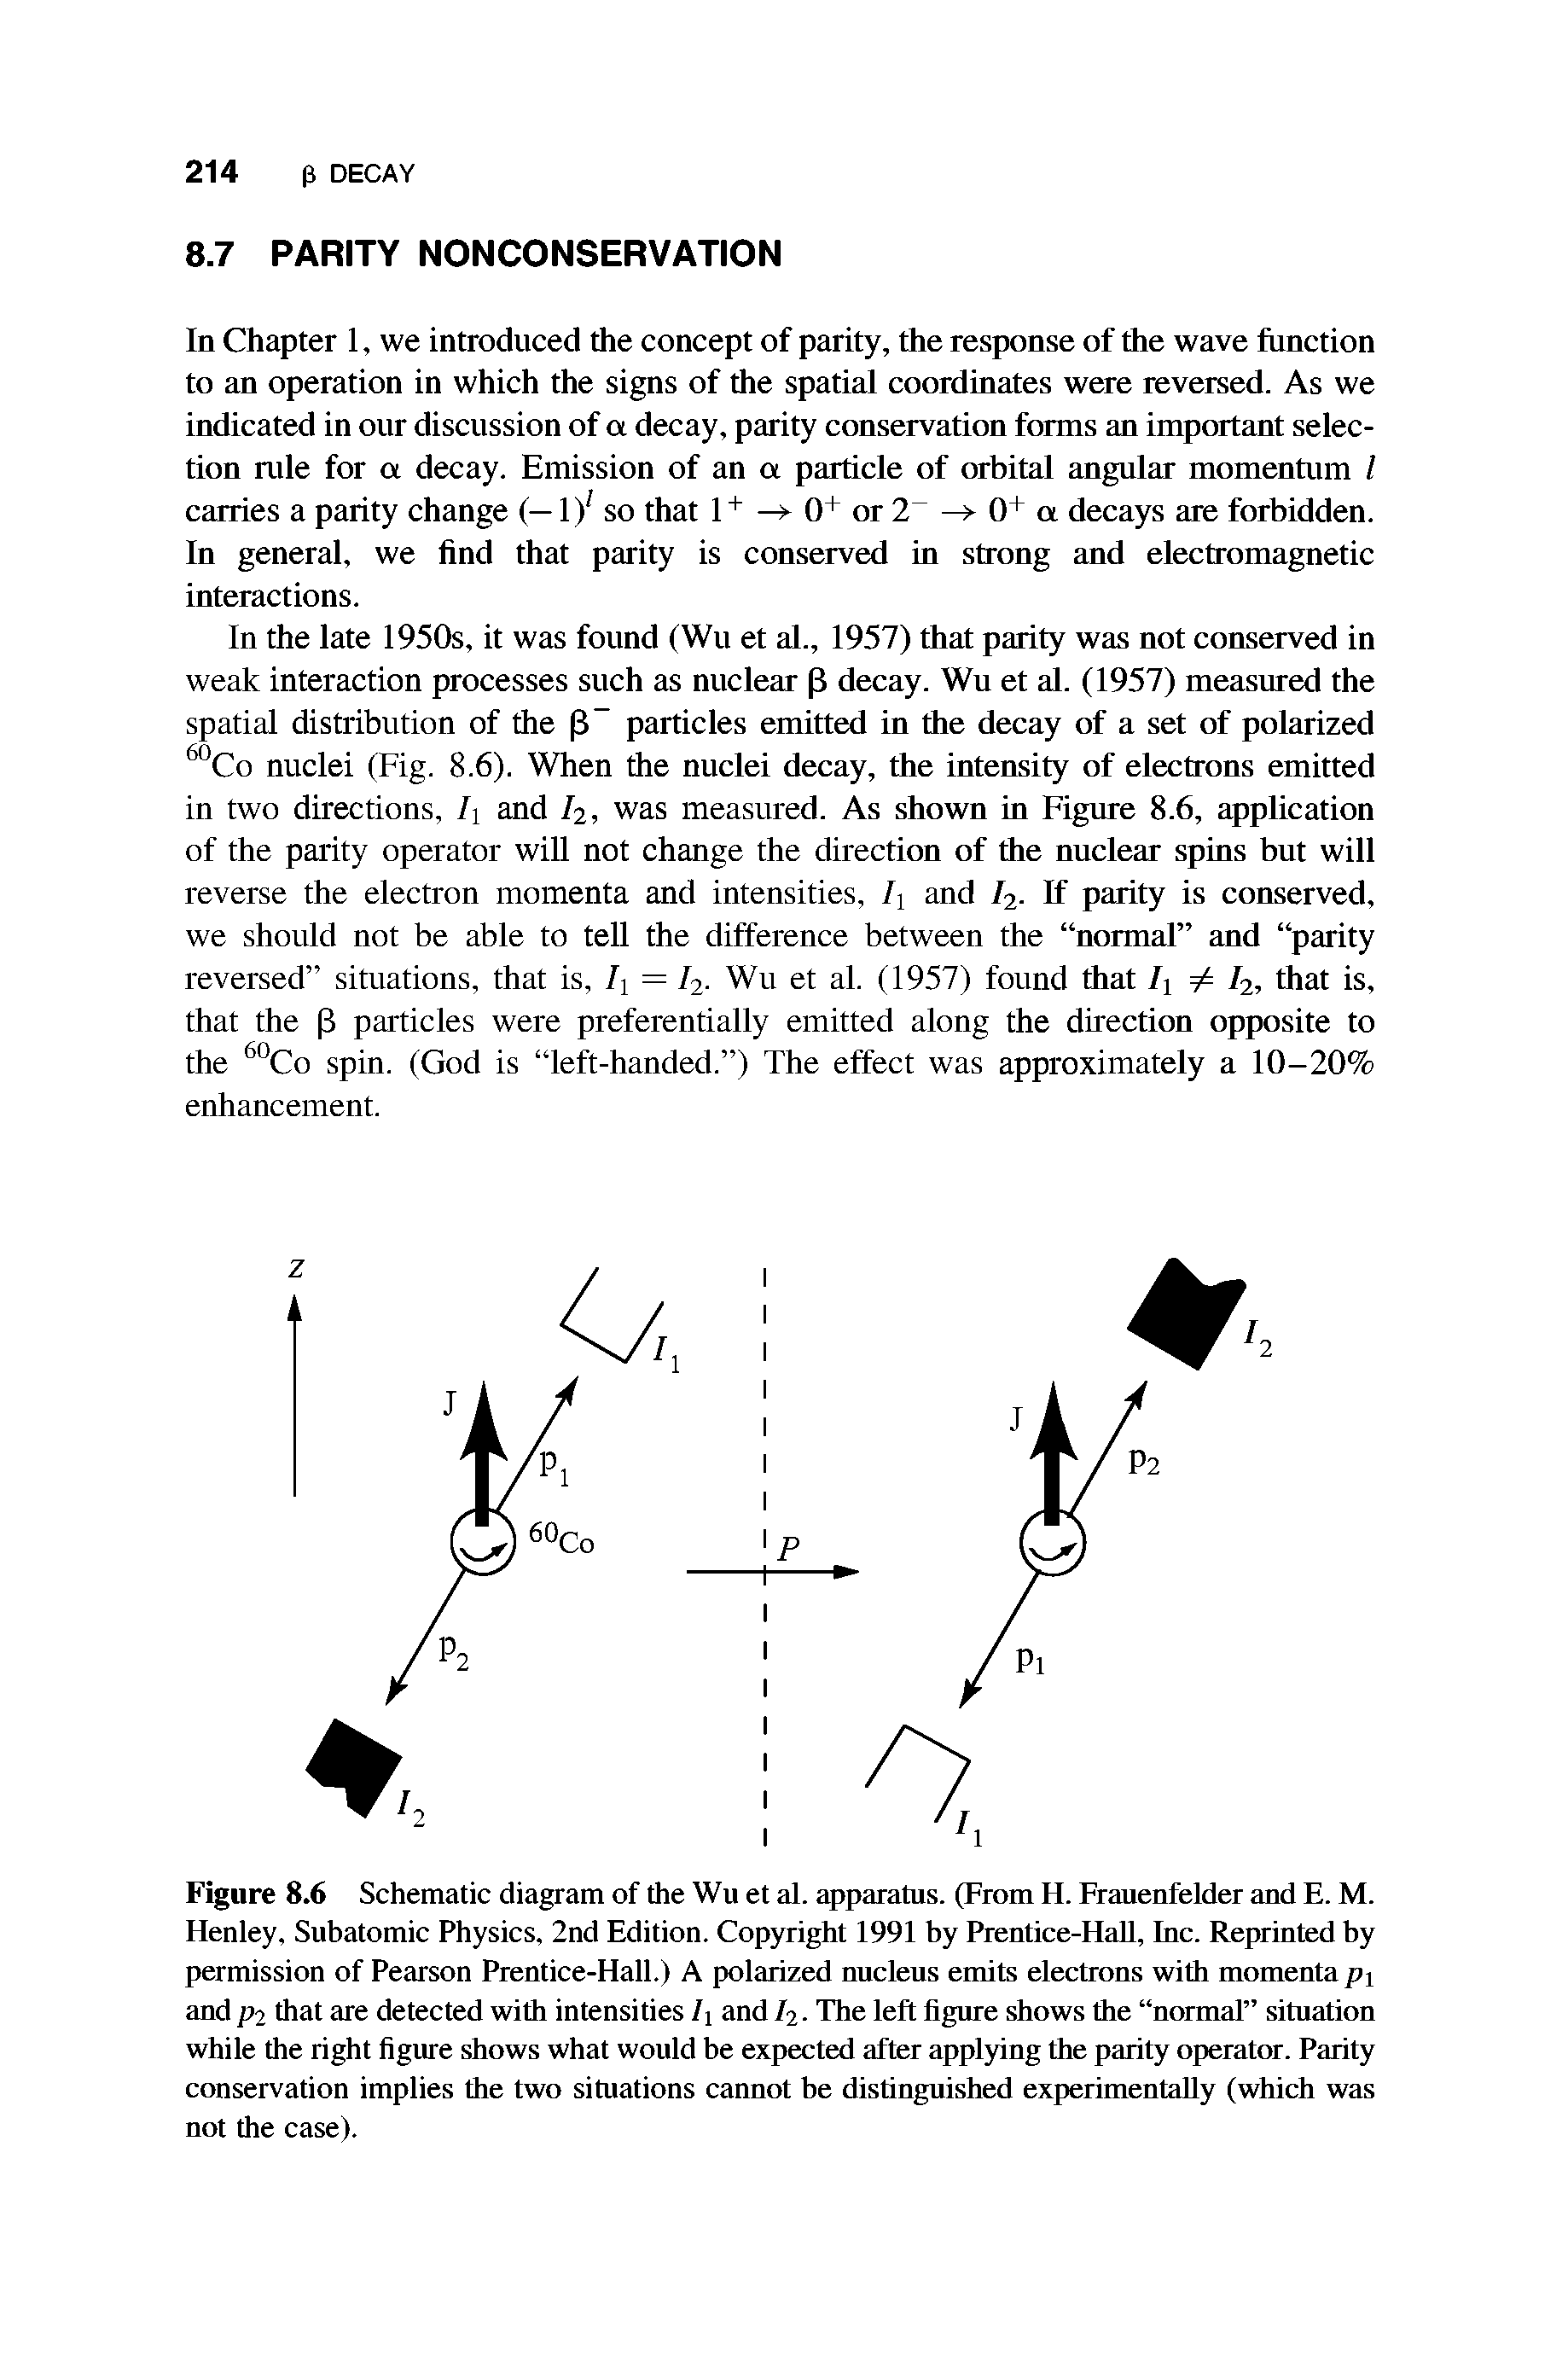 Figure 8.6 Schematic diagram of the Wu et al. apparatus. (From H. Frauenfelder and E. M. Henley, Subatomic Physics, 2nd Edition. Copyright 1991 by Prentice-Hall, Inc. Reprinted by permission of Pearson Prentice-Hall.) A polarized nucleus emits electrons with momenta pt and P2 that are detected with intensities Ii and 72. The left figure shows the normal situation while the right figure shows what would be expected after applying the parity operator. Parity conservation implies the two situations cannot be distinguished experimentally (which was not the case).